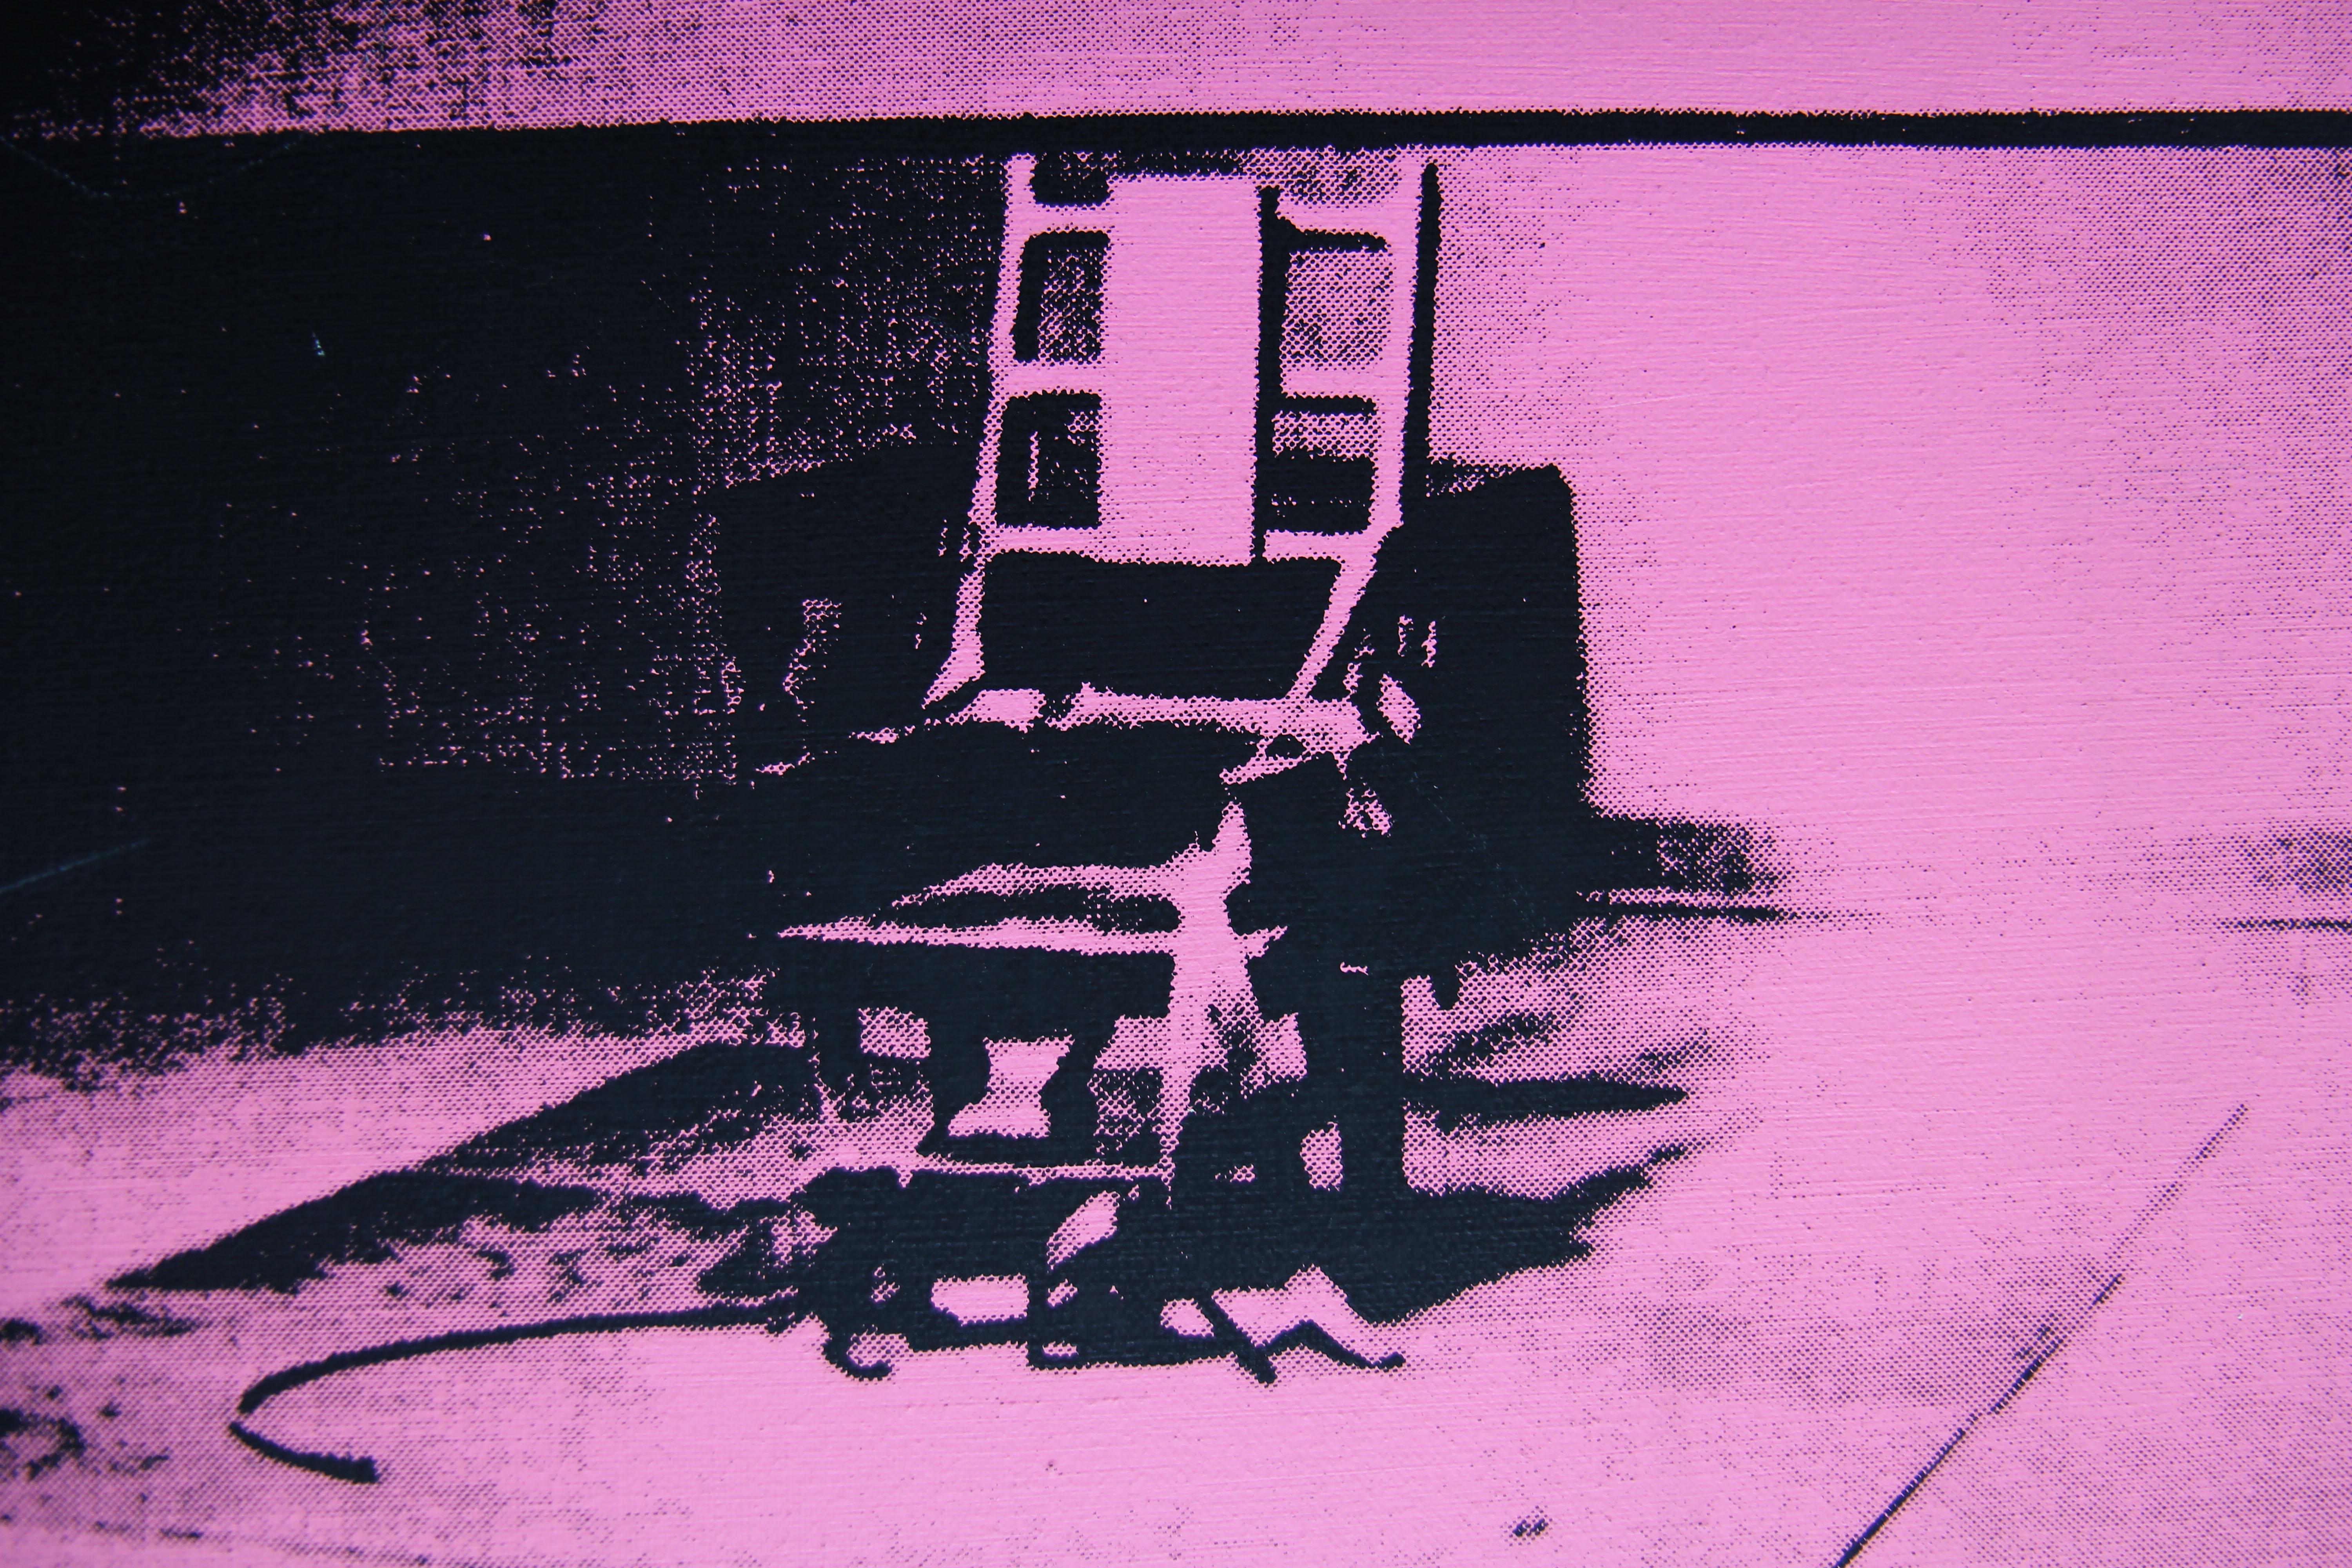 Denied Warhol Pink Electric Chair Painting by Charles Lutz
Silkscreen and acrylic on linen with the Denied stamp of the Andy Warhol Art Authentication Board.
22 x 28